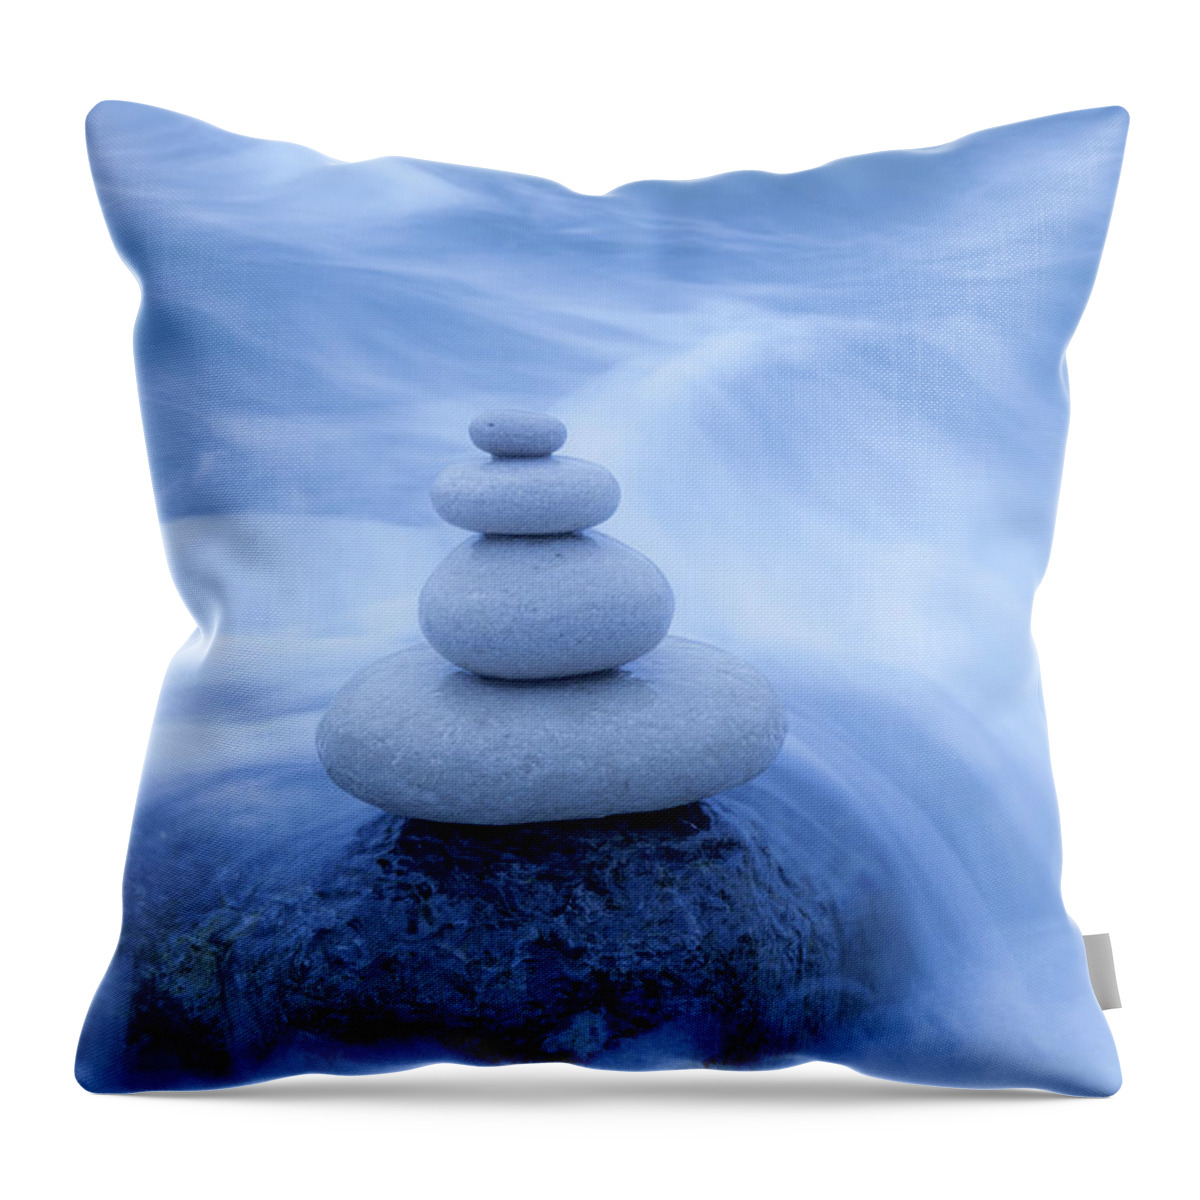 Tranquility Throw Pillow featuring the photograph Balanced Stones On The Beach by Travelpix Ltd